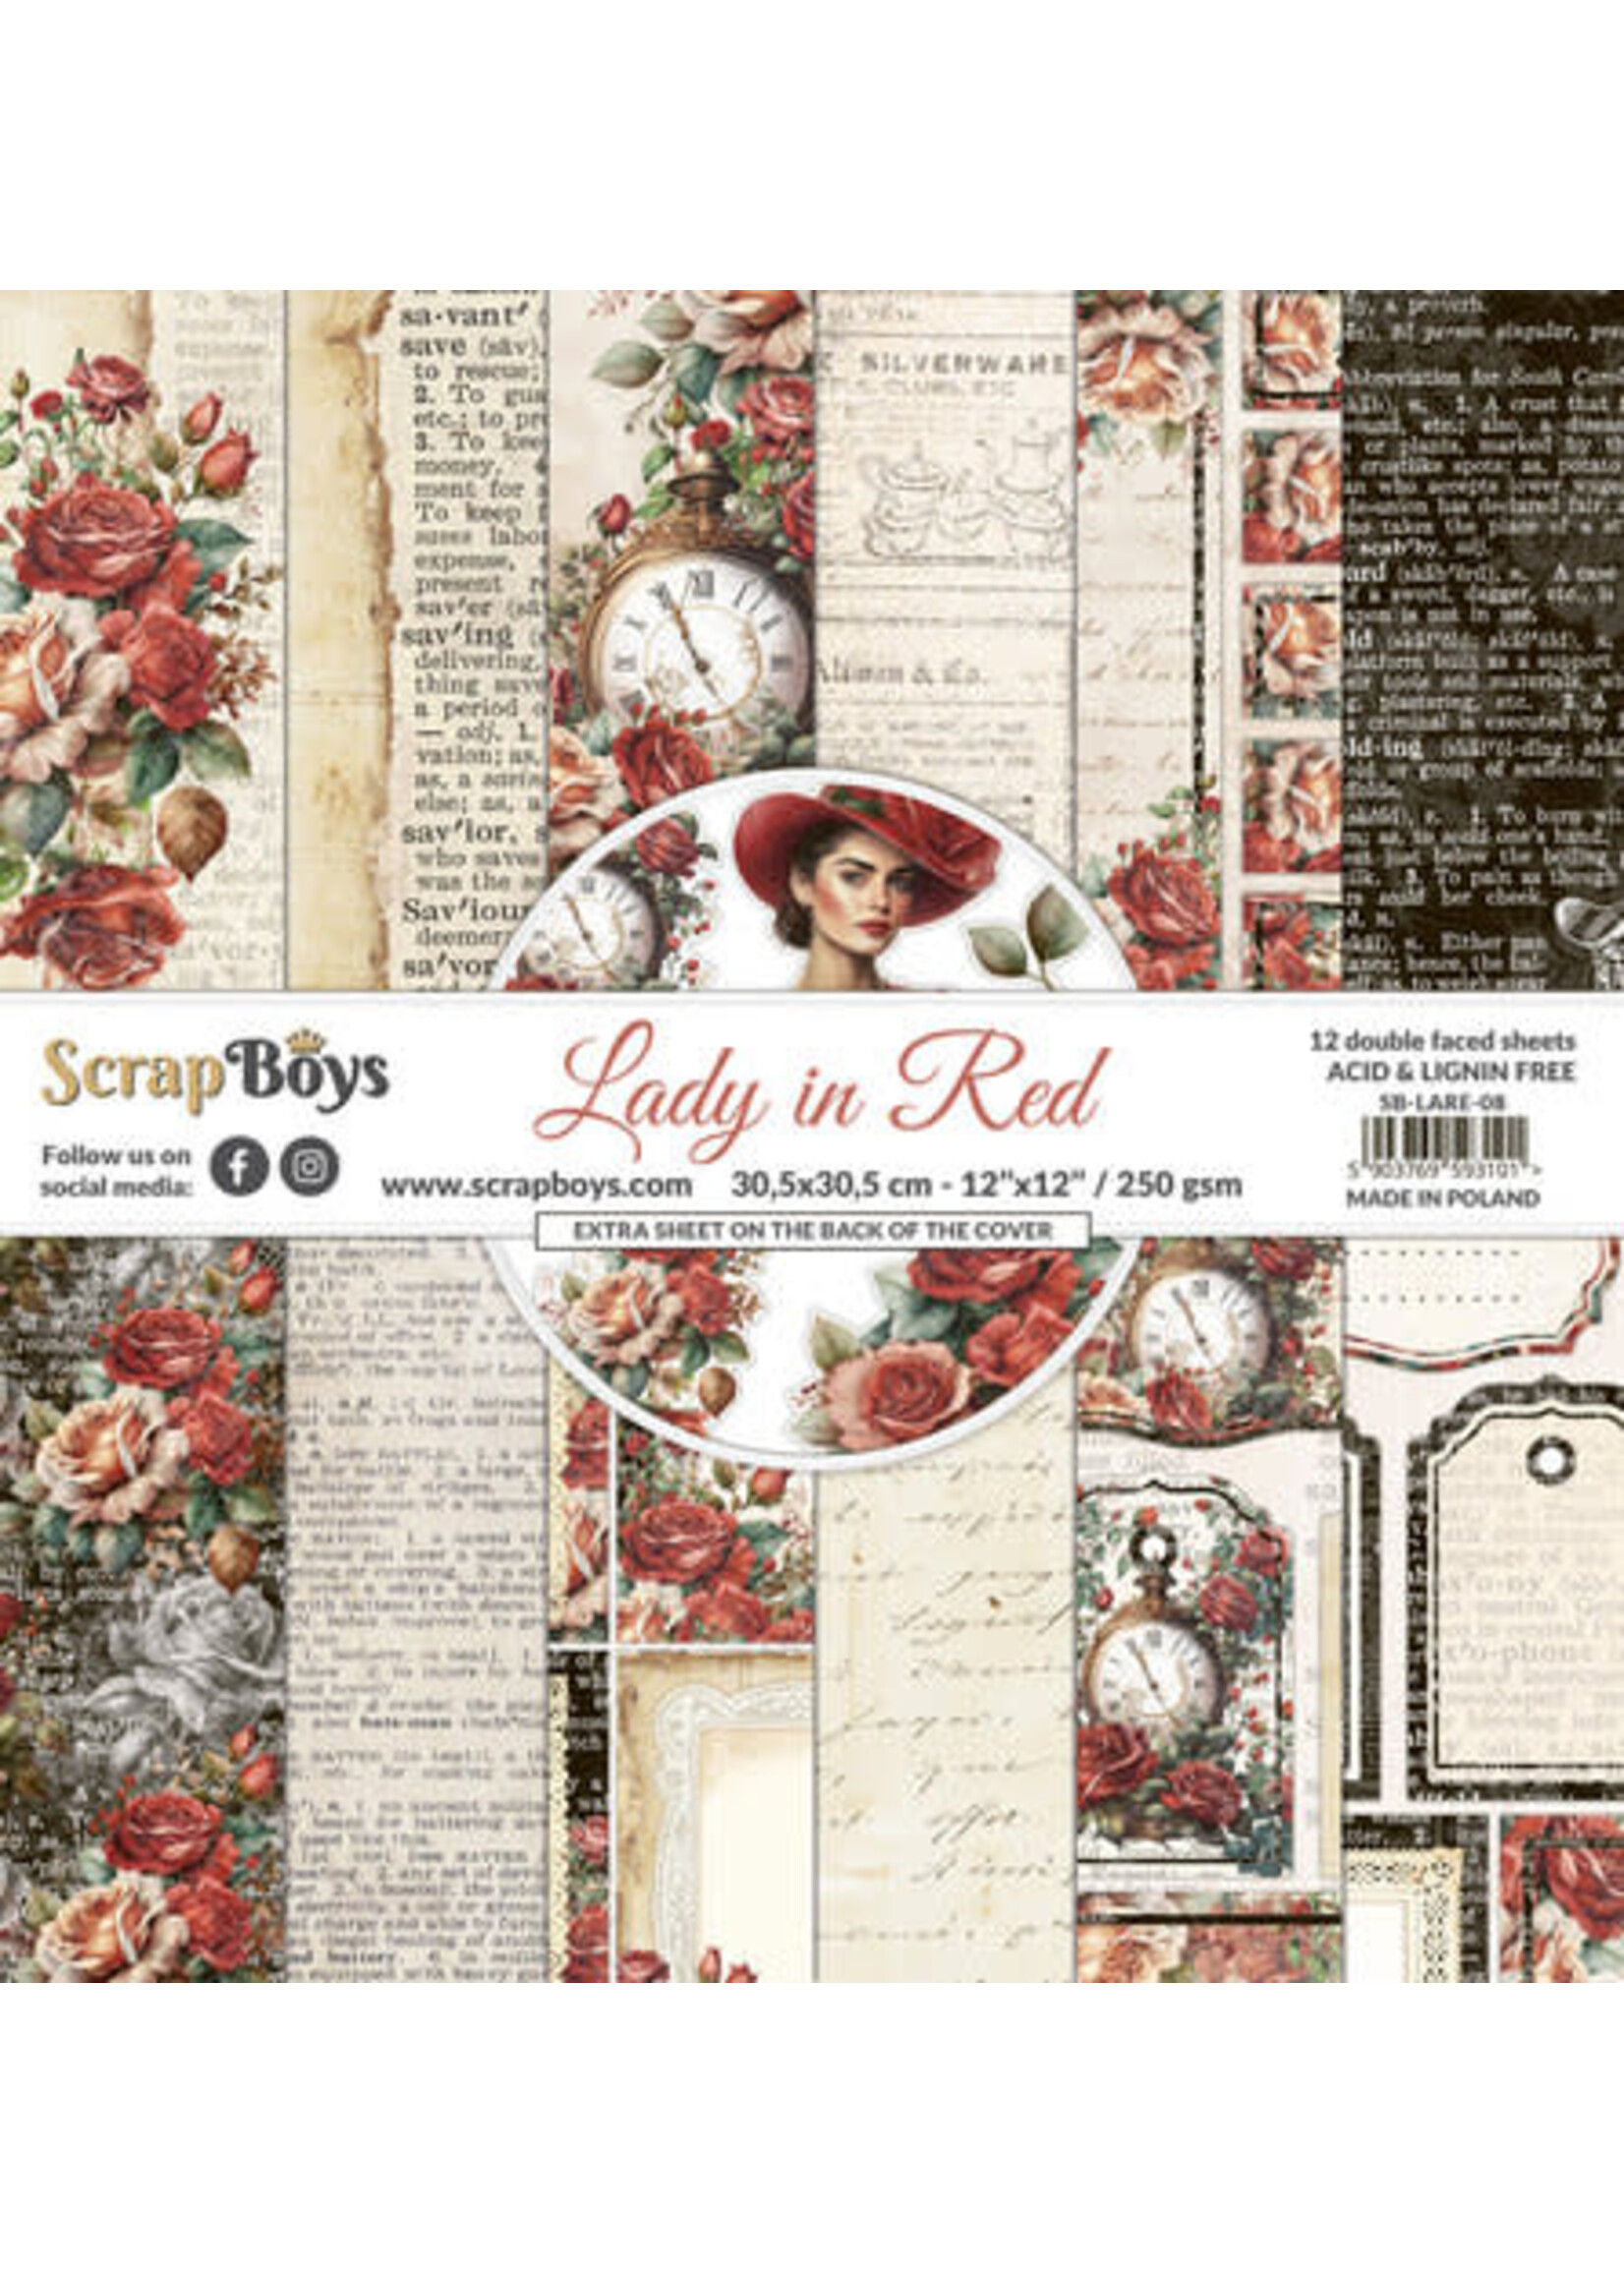 Scrapboys Lady in Red 12x12 Inch Paper Pack (SB-LARE-08)